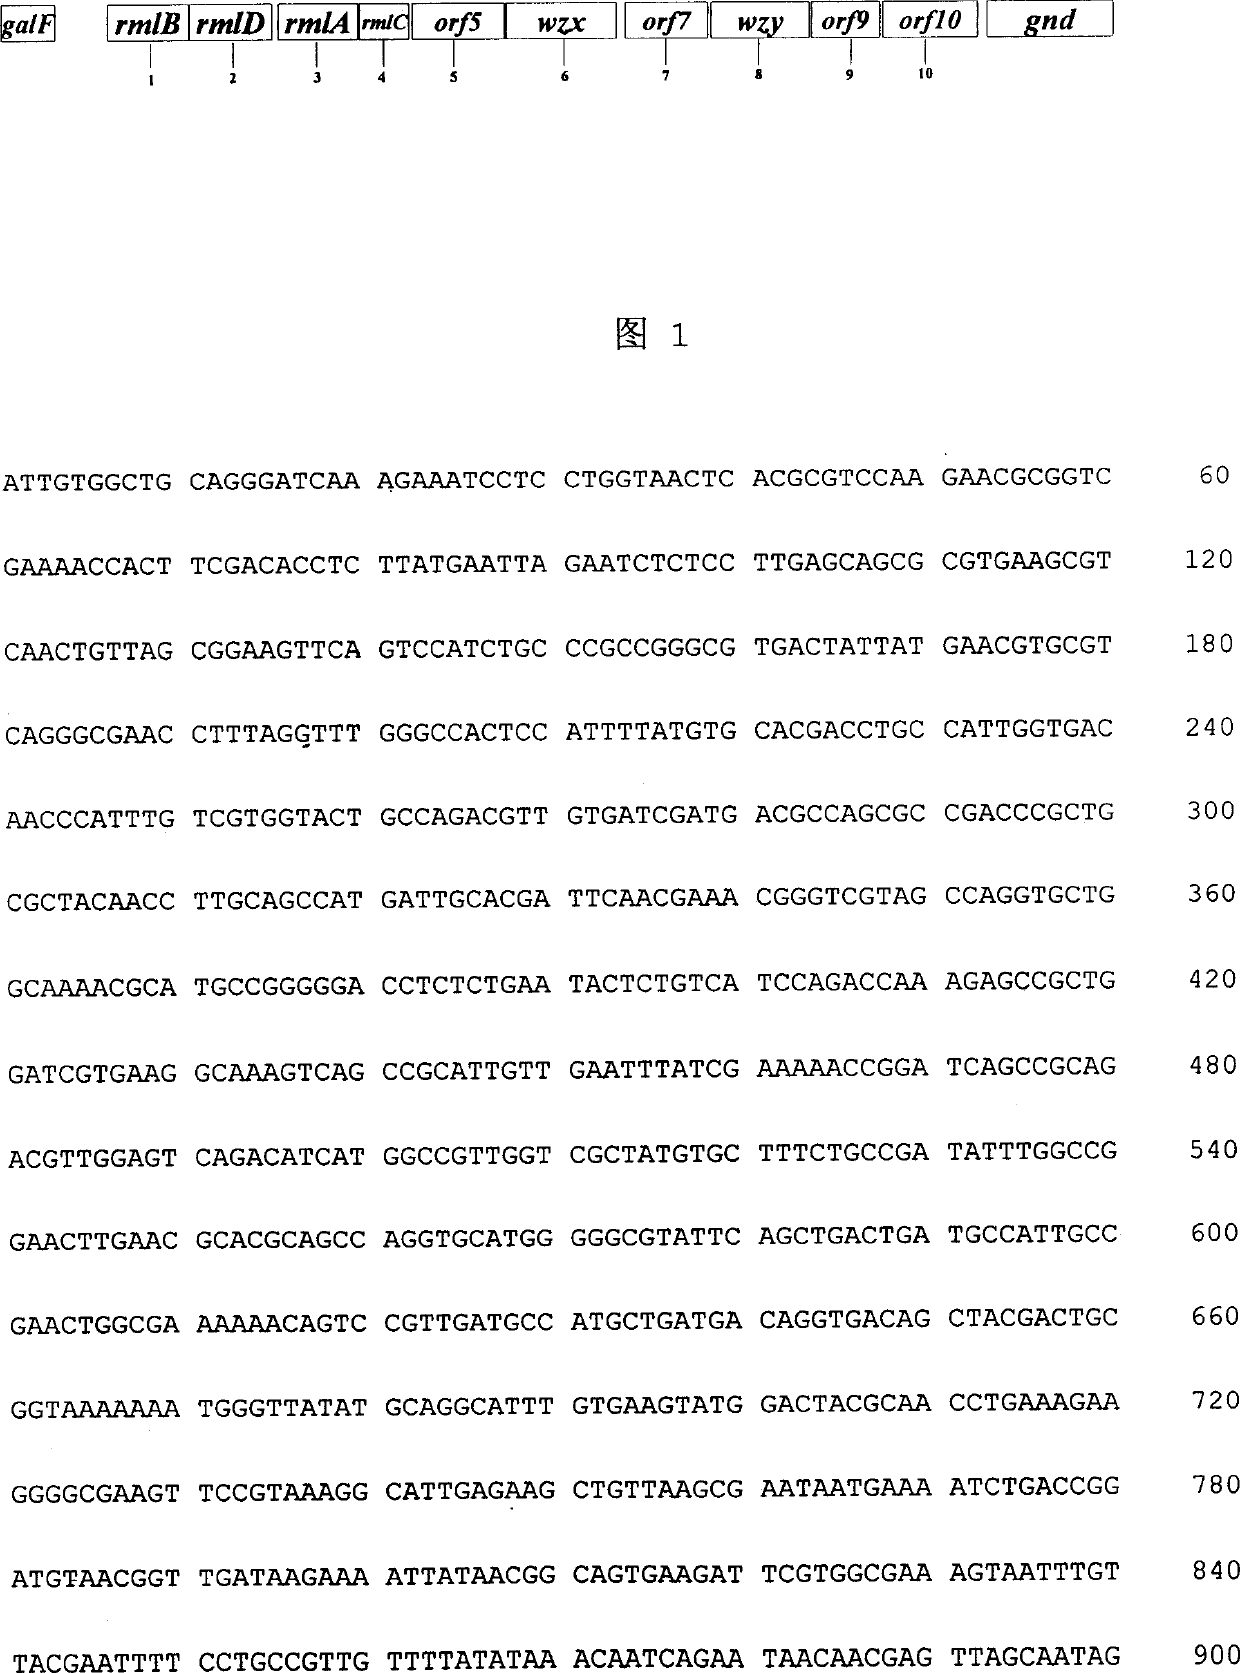 Nucleotide with specificity to o-antigen of type-12 shigella shigae and colibacillus 0152